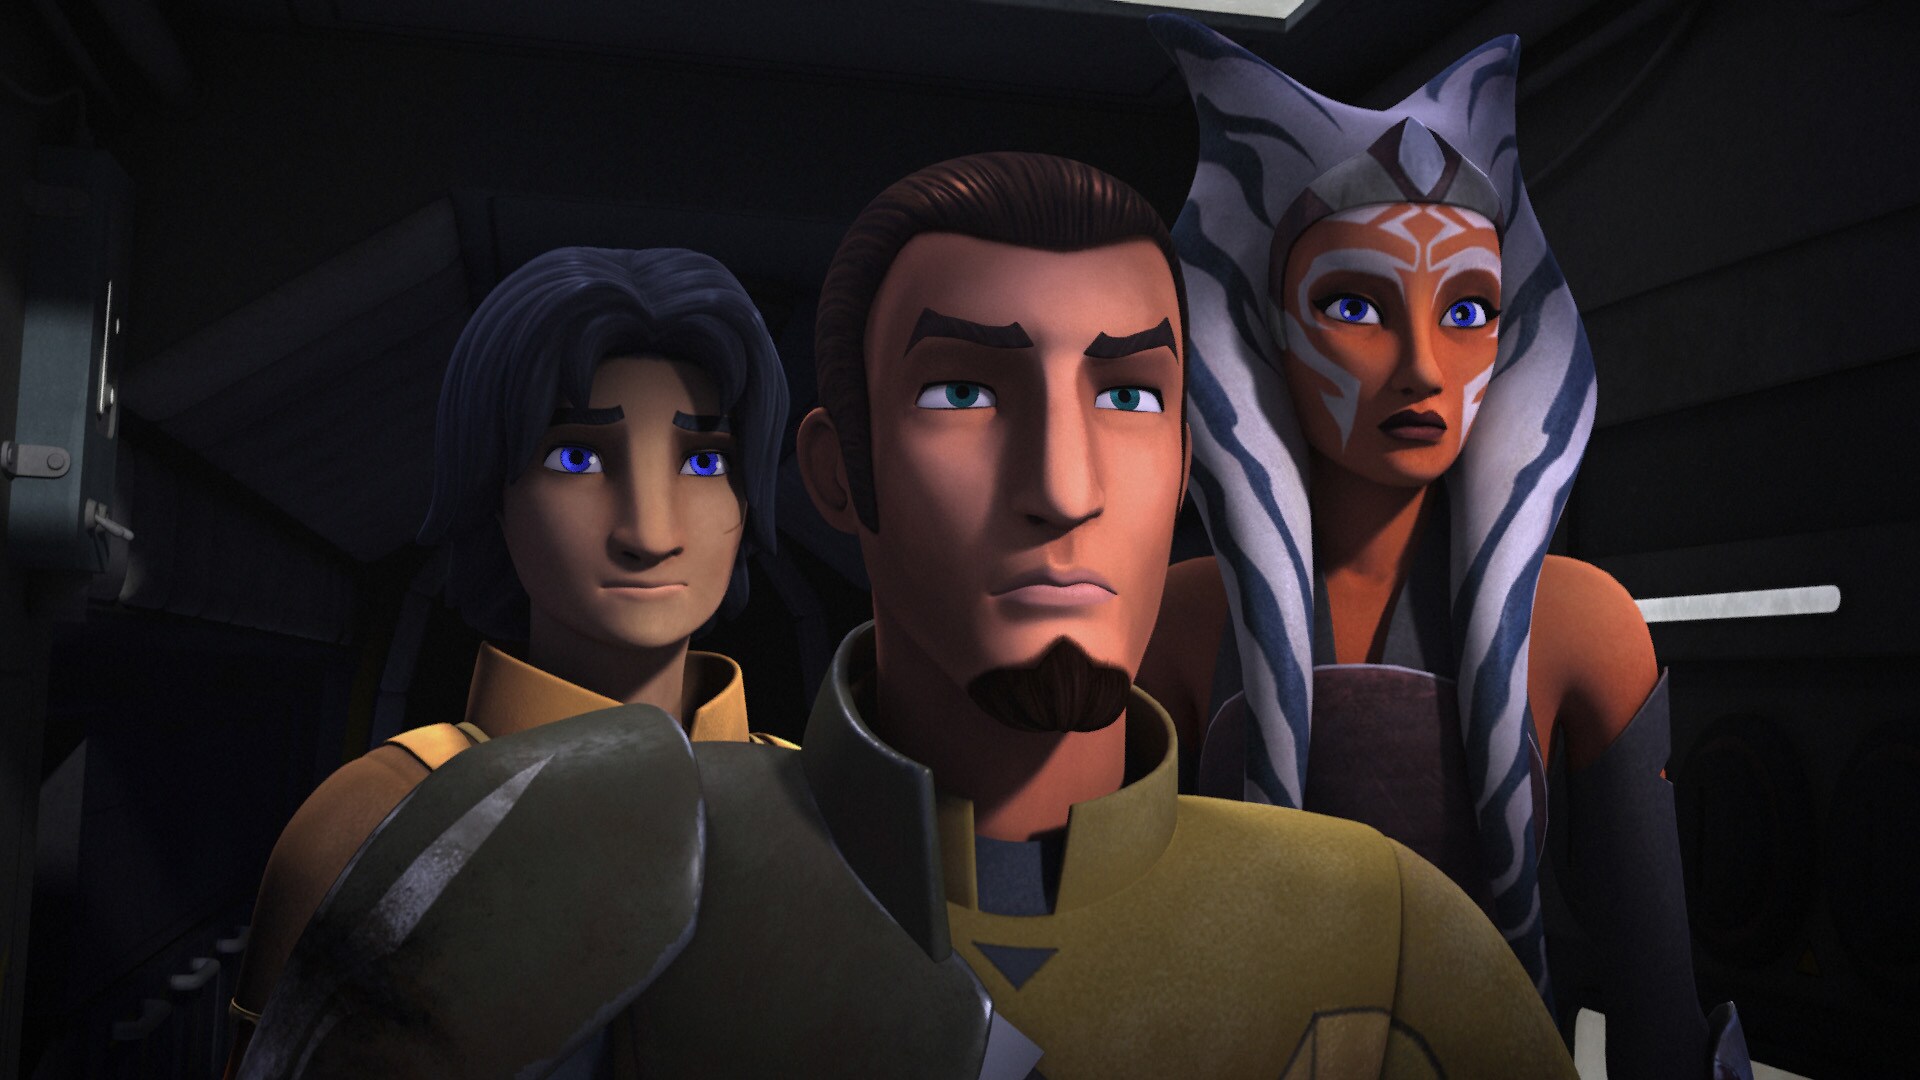 Kanan enters, asking how they can address the problem of the Inquisitors. She says that in times ...